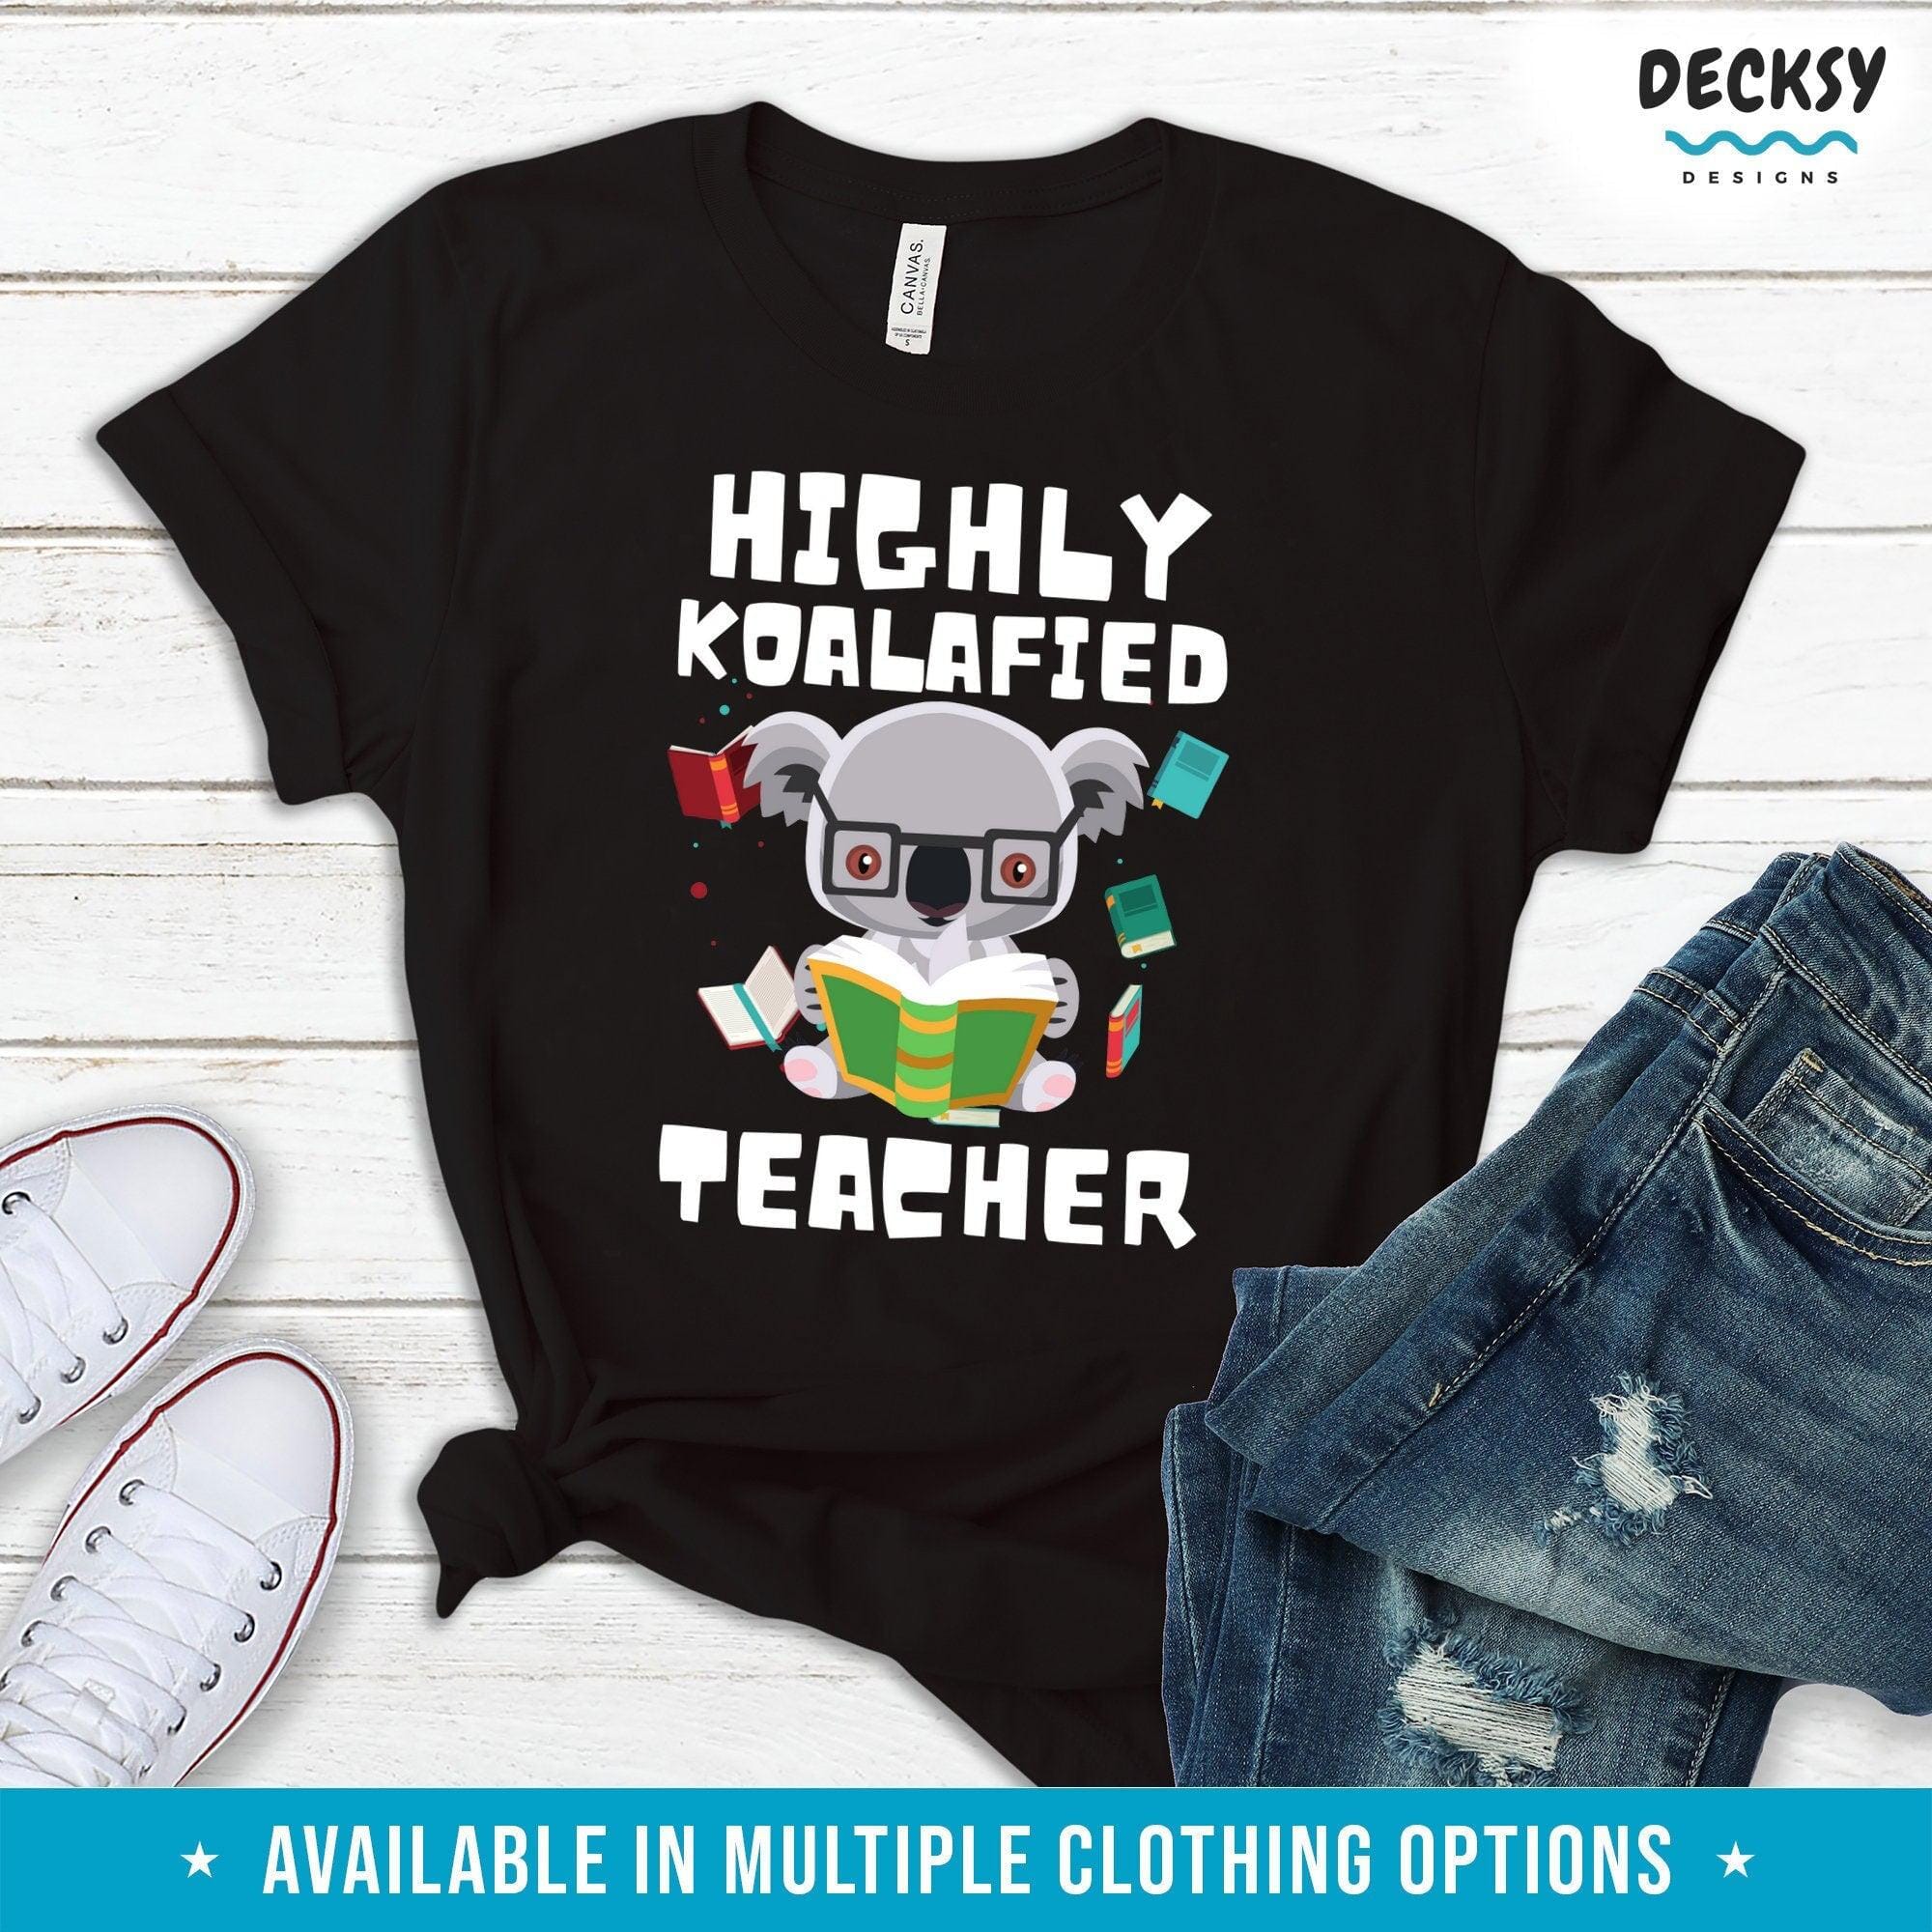 Funny Teacher Shirt, Gift For New Teacher-Clothing:Gender-Neutral Adult Clothing:Tops & Tees:T-shirts:Graphic Tees-DecksyDesigns